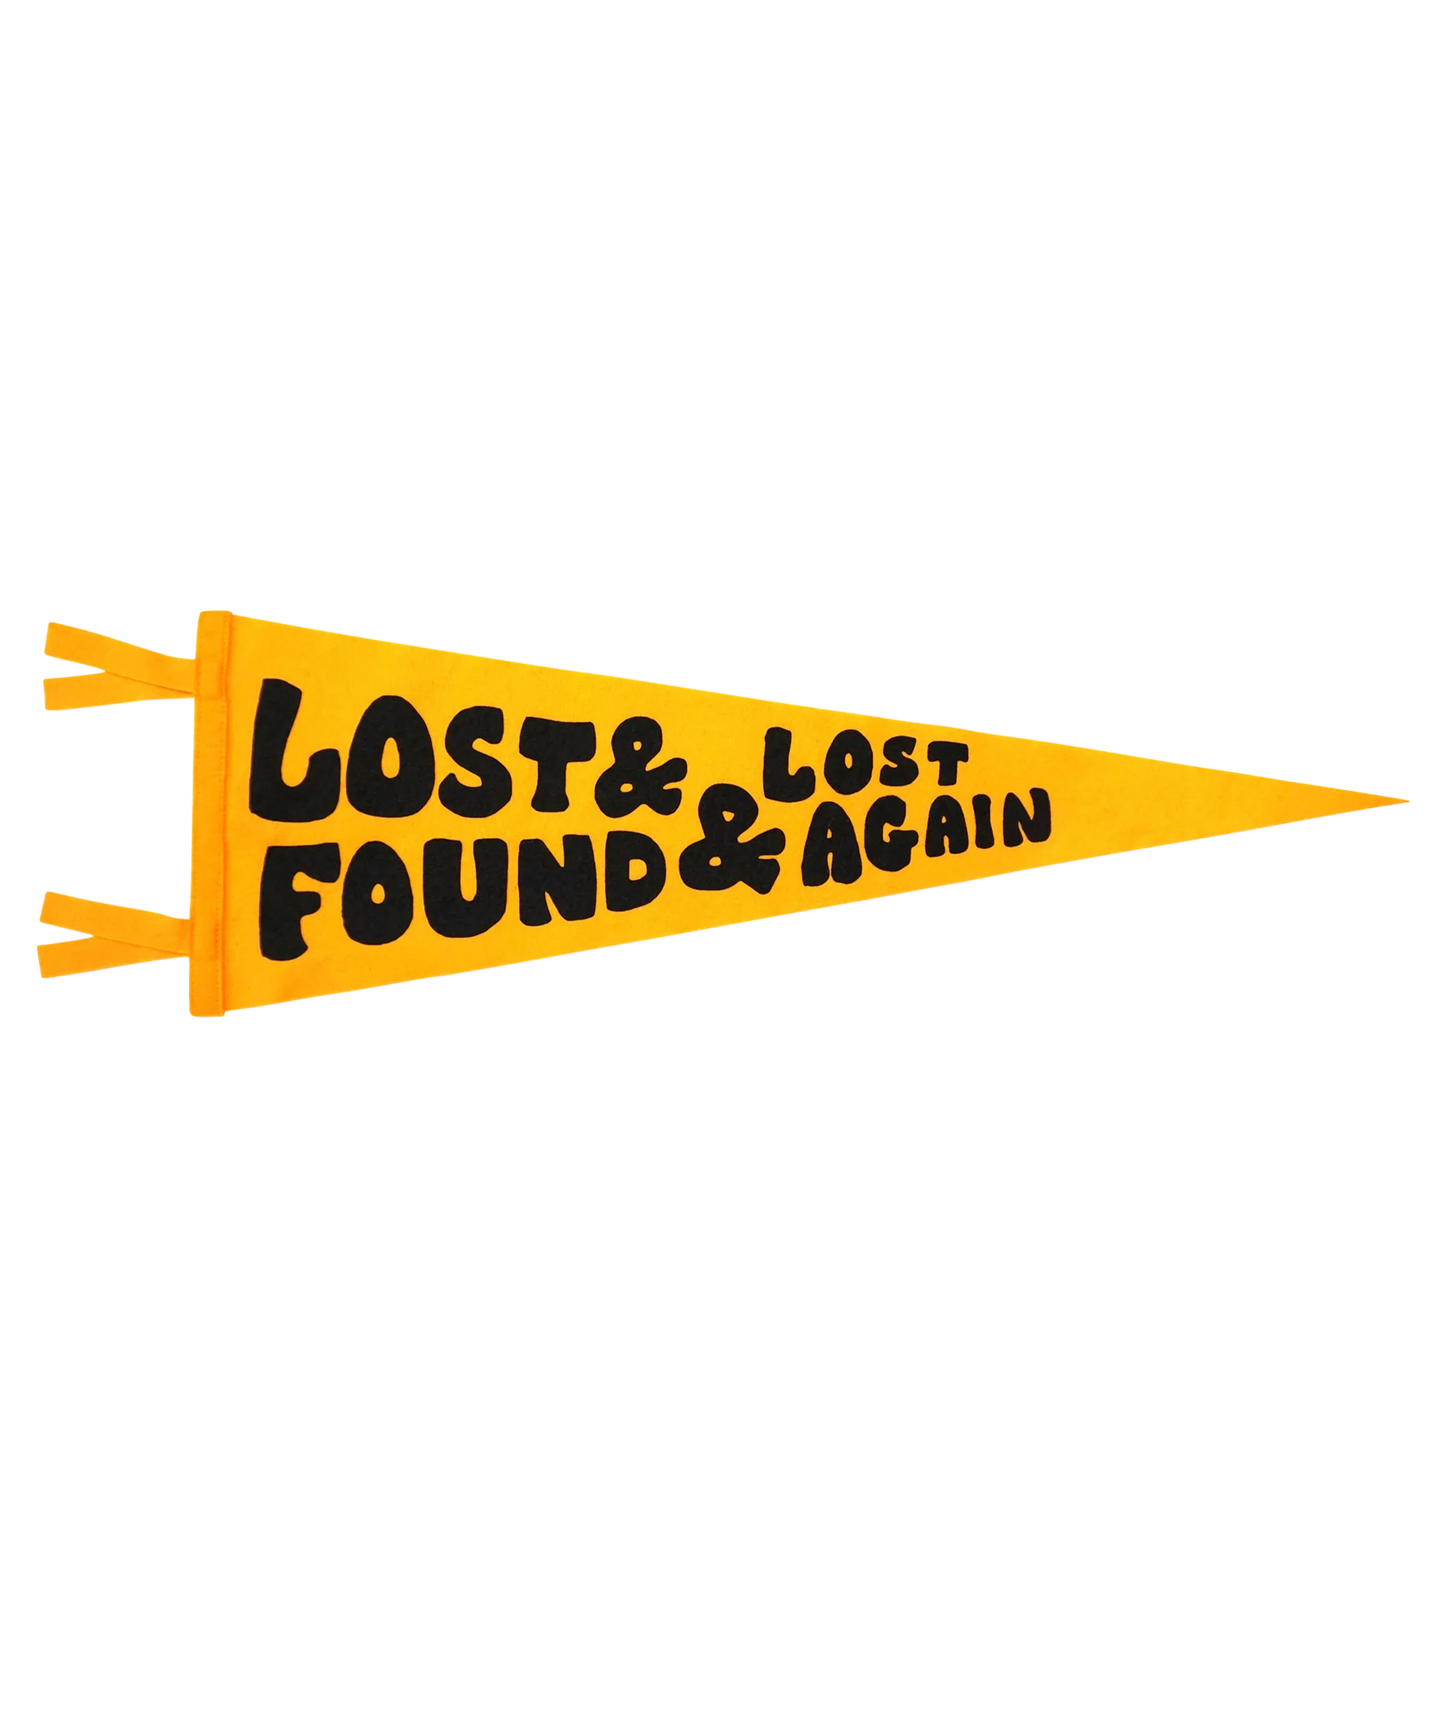 Lost & Found & Lost Again Pennant • Chrome Yellow x Office of Brothers x Oxford Pennant Original